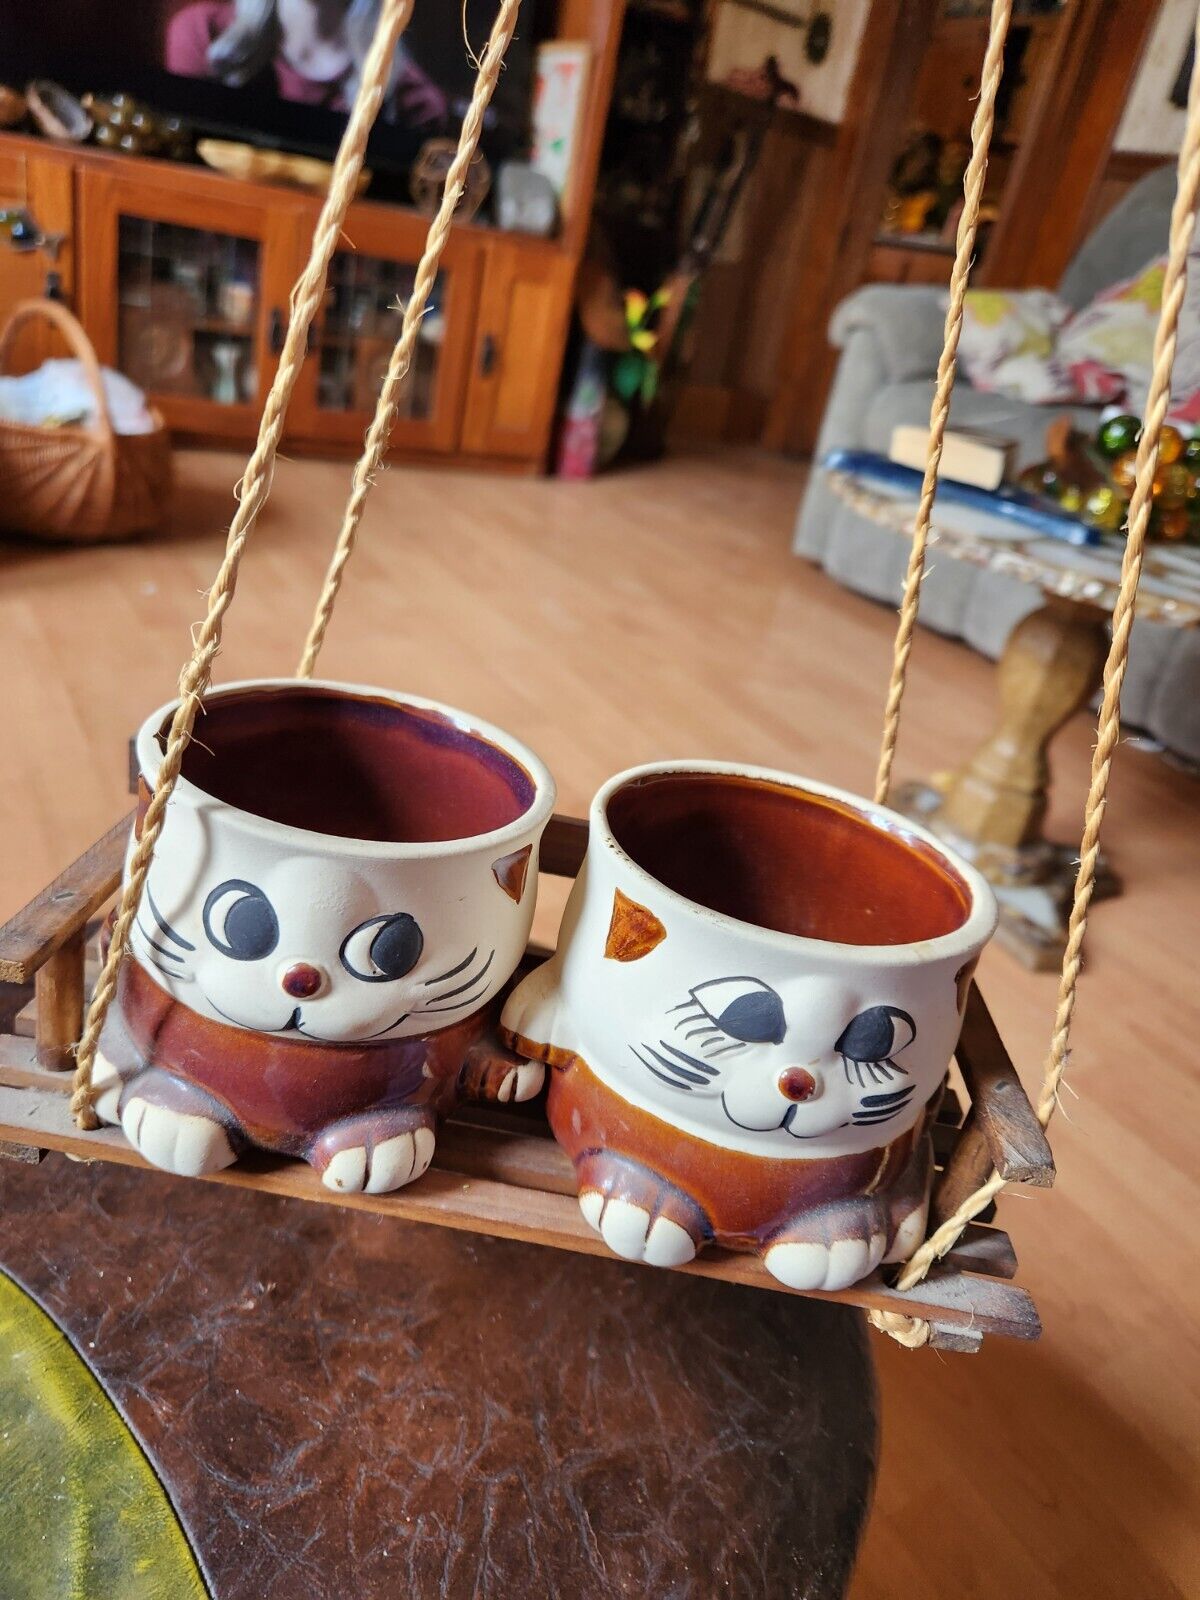 Vintage Ceramic Kitty Cat Planters On A Wooden Swing Hanging Planter 